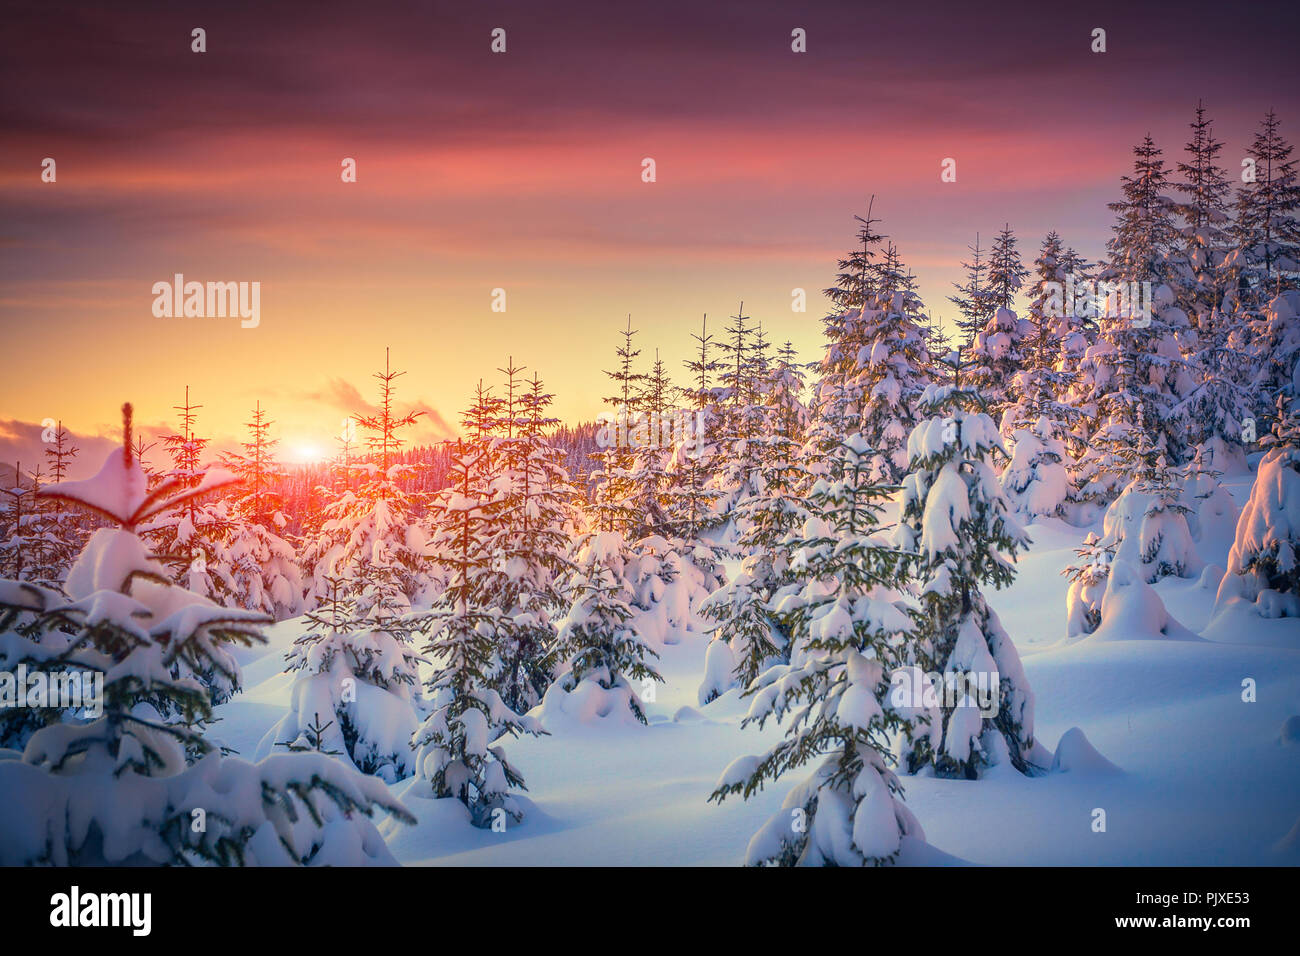 Colorful landscape at the winter sunrise in the mountain forest Stock Photo